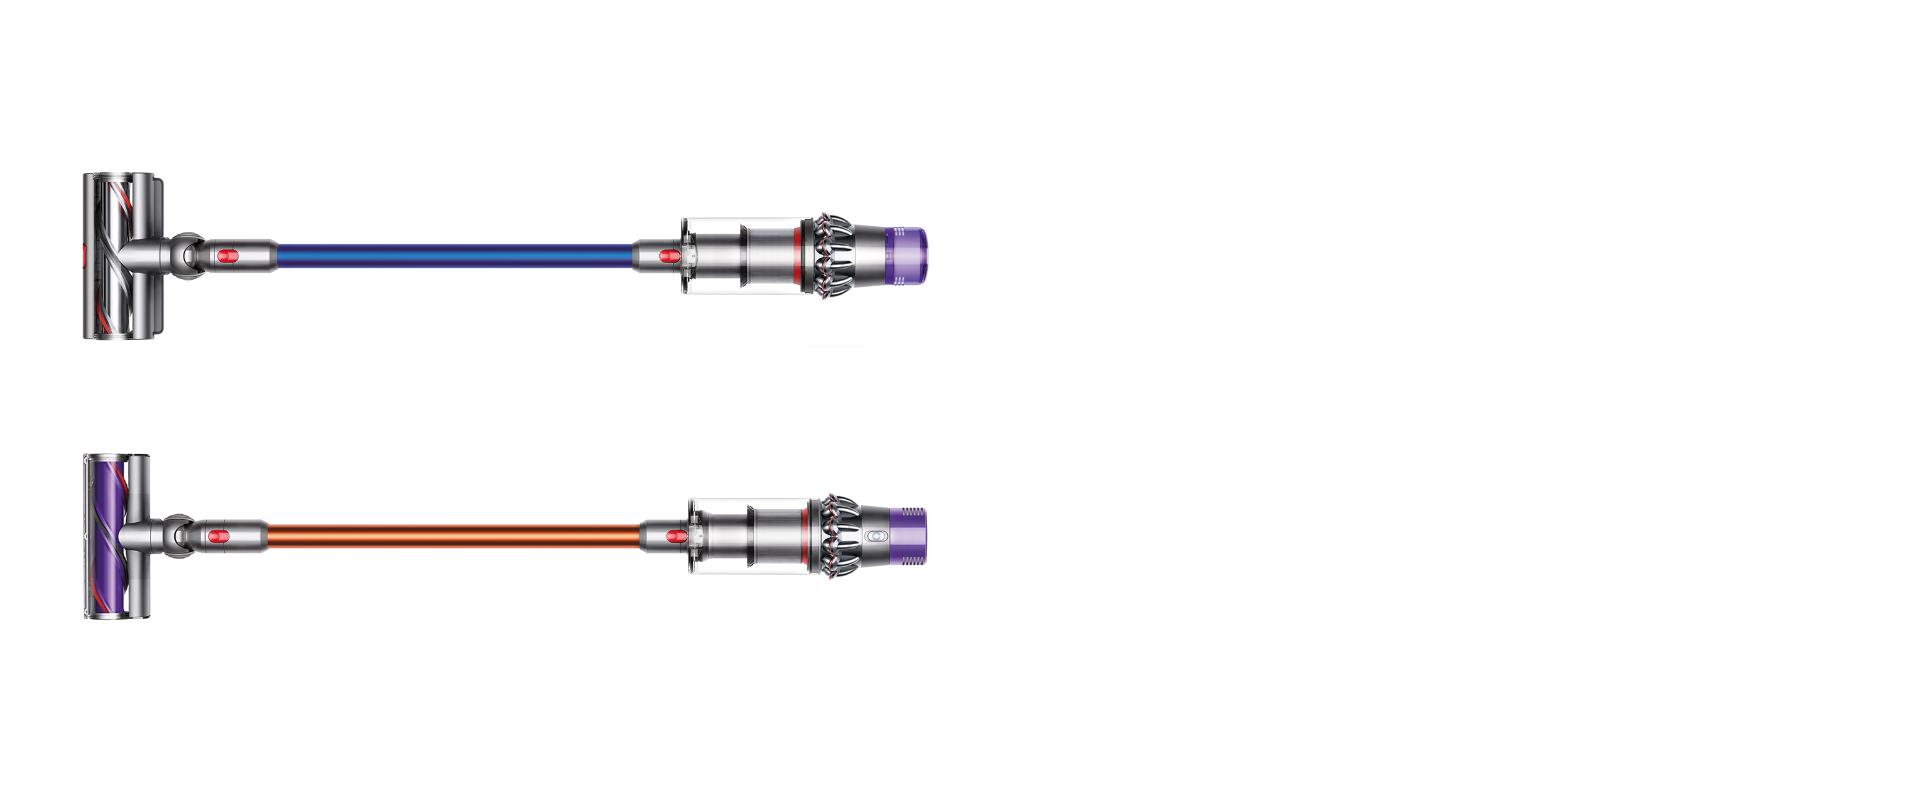 Dyson vacuum cleaners product line up